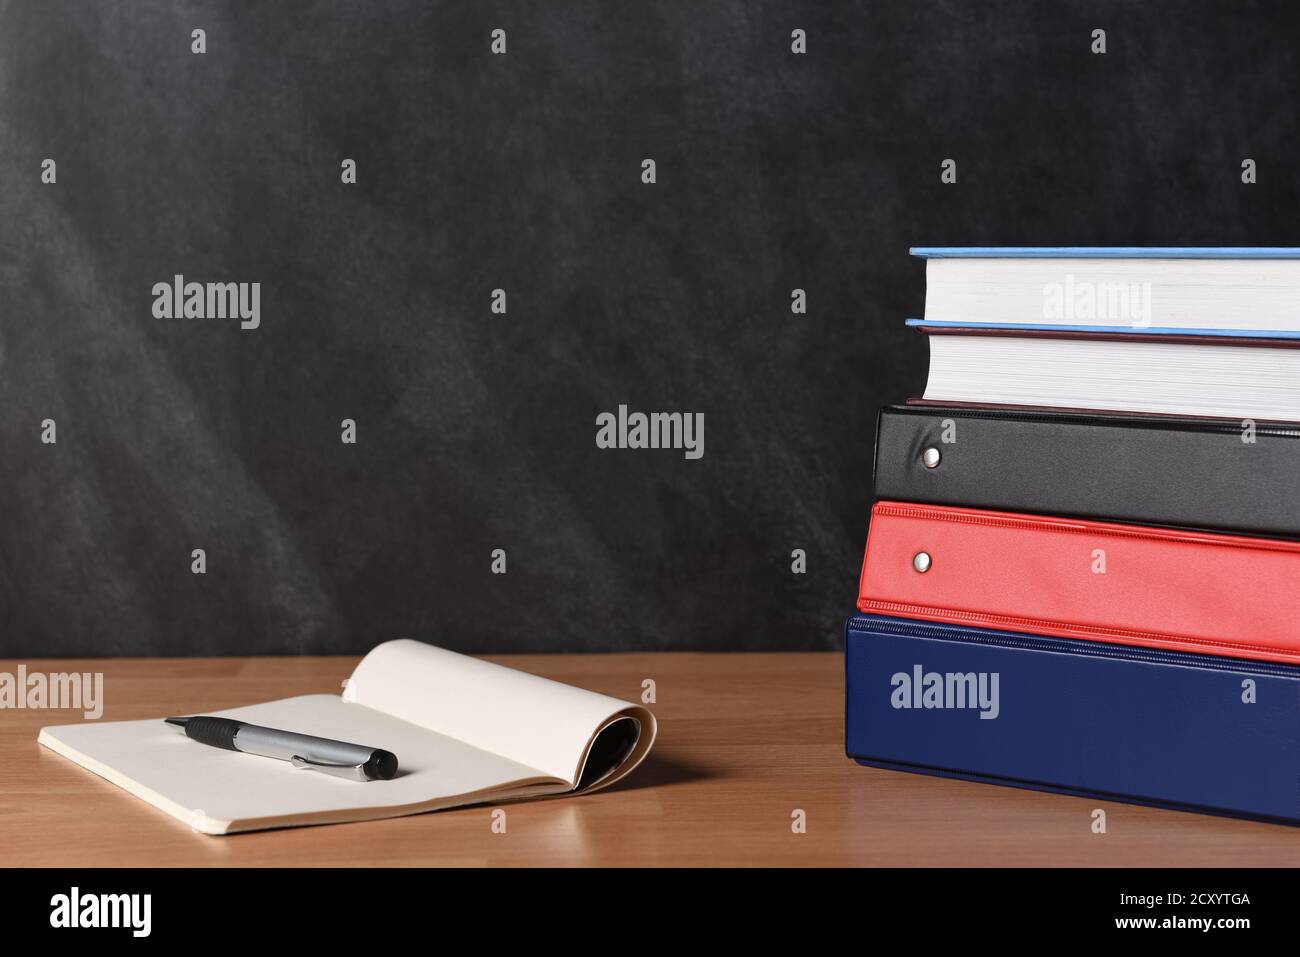 A stack of three different binders on desk in front of black board with two books and note pad and pen. Stock Photo